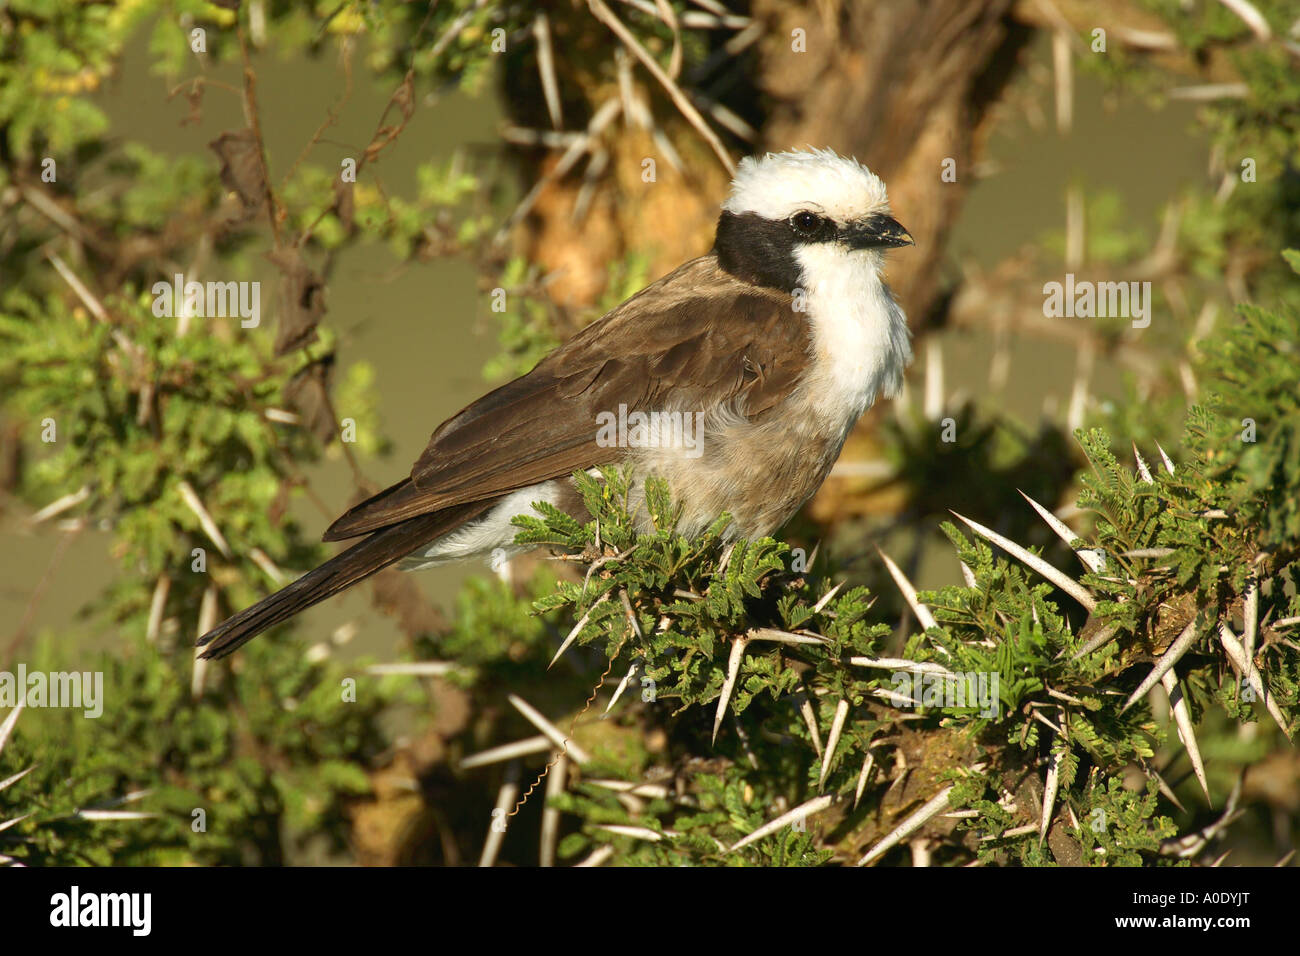 White Crowned Shrike Eurocephalus anguitimens perched in an Acacia tree in Tanzania East Africa Stock Photo